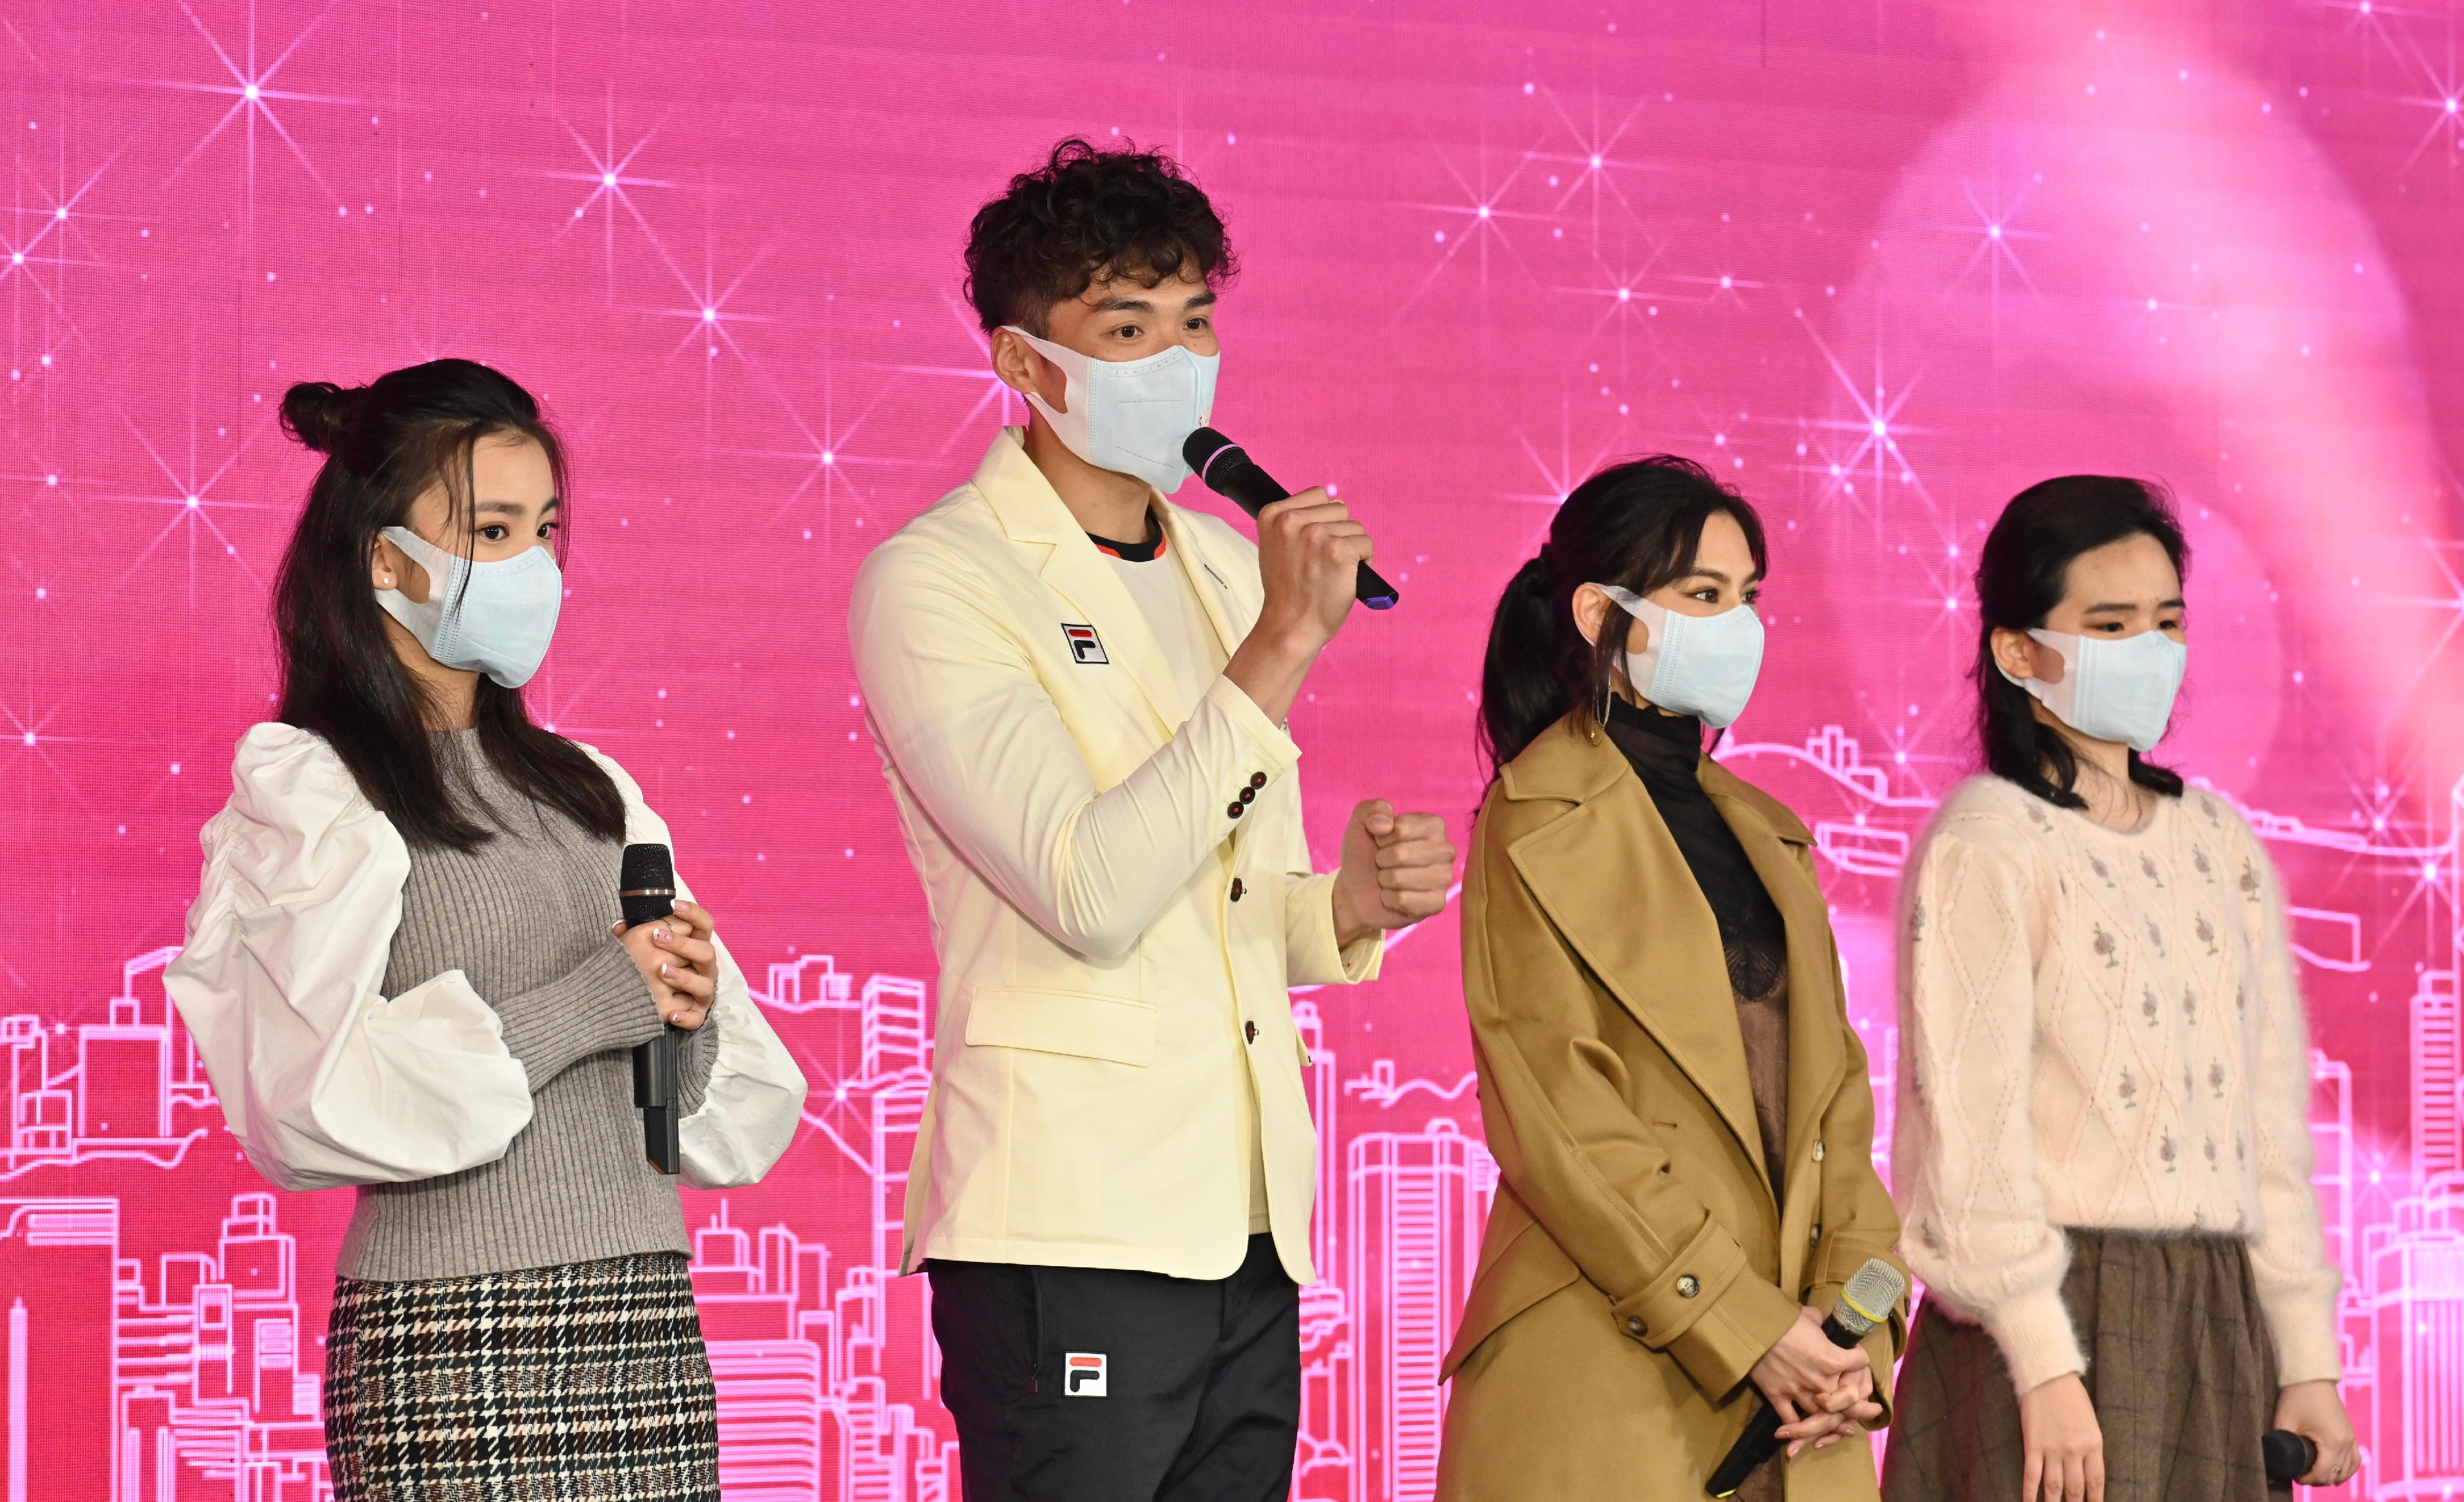 The Launch of Celebrations for the 25th Anniversary of the Establishment of the Hong Kong Special Administrative Region of the People’s Republic of China was held today (December 29). (From left) Singer Chantel Yiu, fencer Cheung Siu-lun, singer Gin Lee and soprano Michelle Siu, who will be singing the theme song, shared their feelings and joy of participating in the 25th anniversary celebrations at the ceremony.